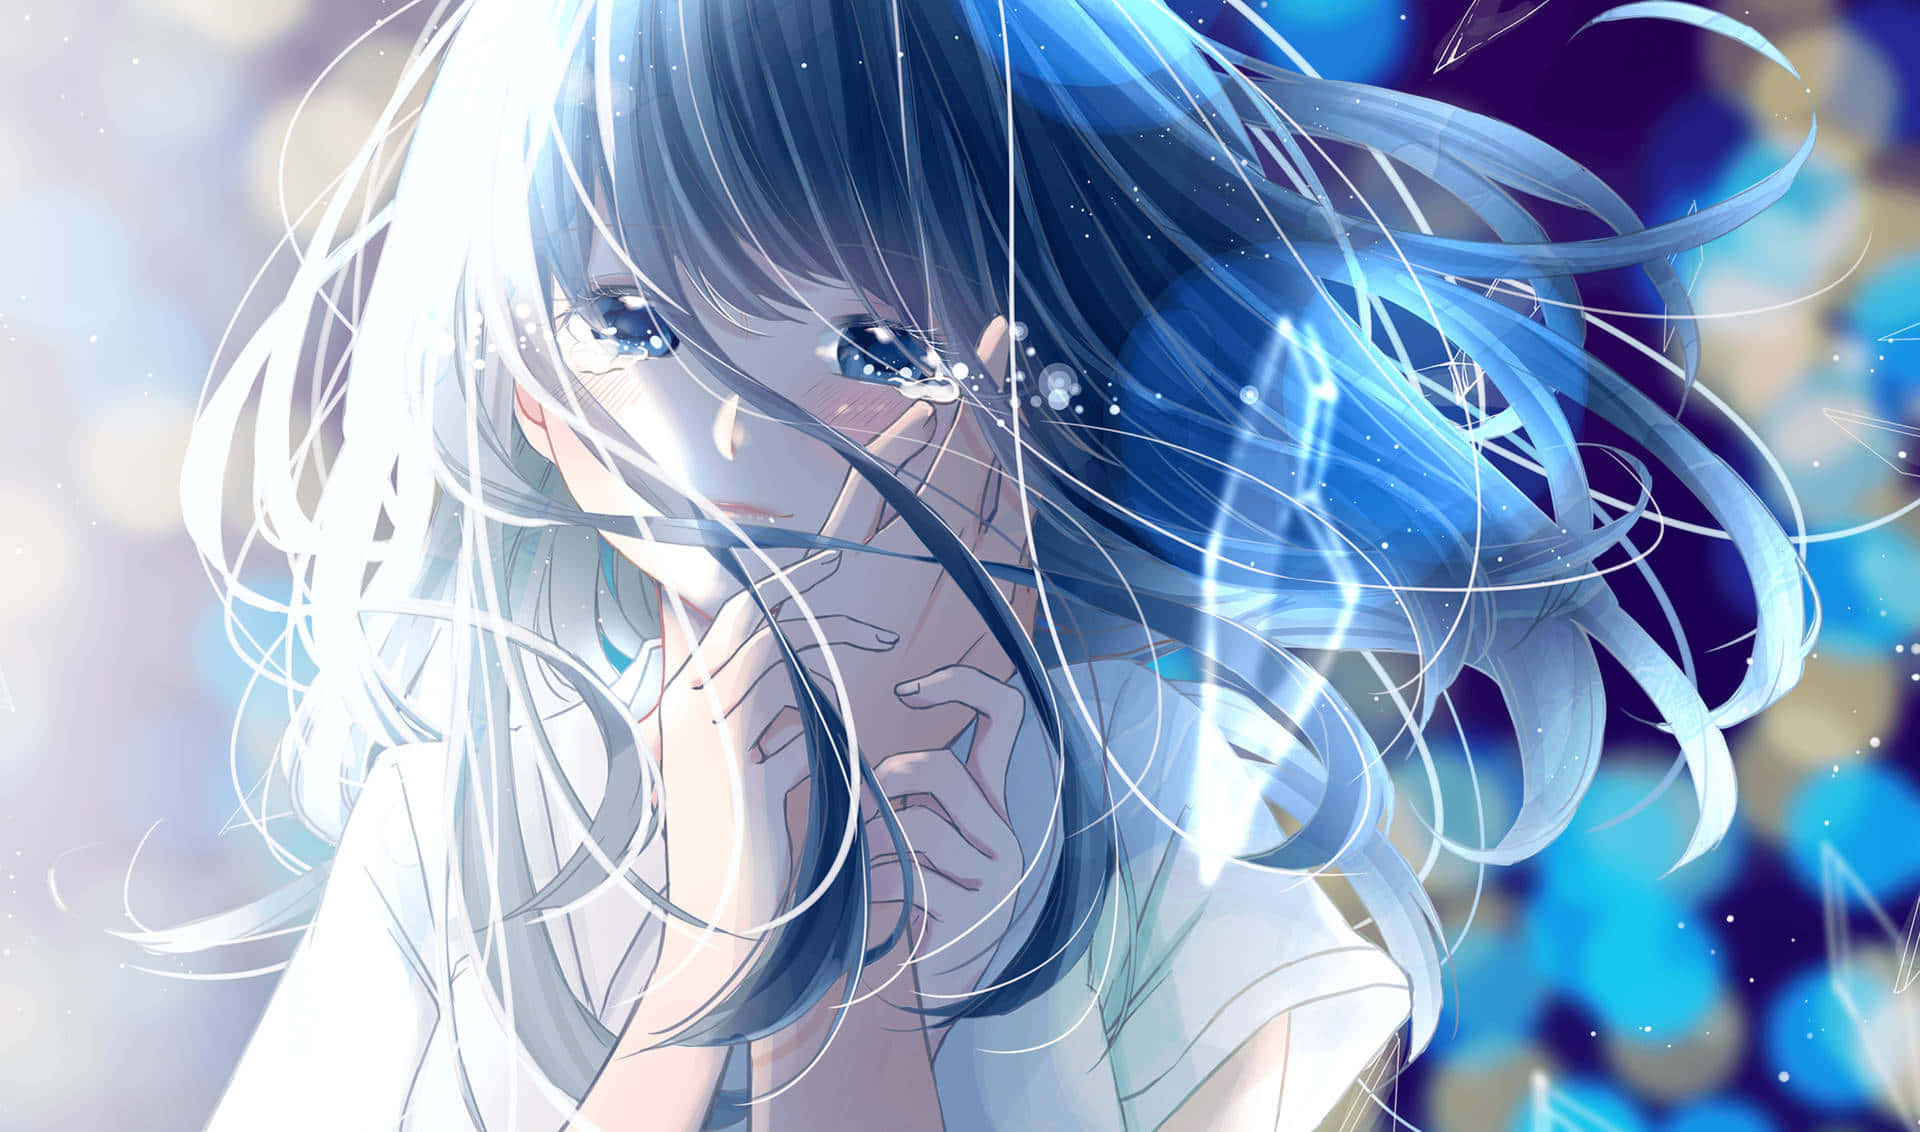 A melancholic anime girl as she contemplates her situation. Wallpaper